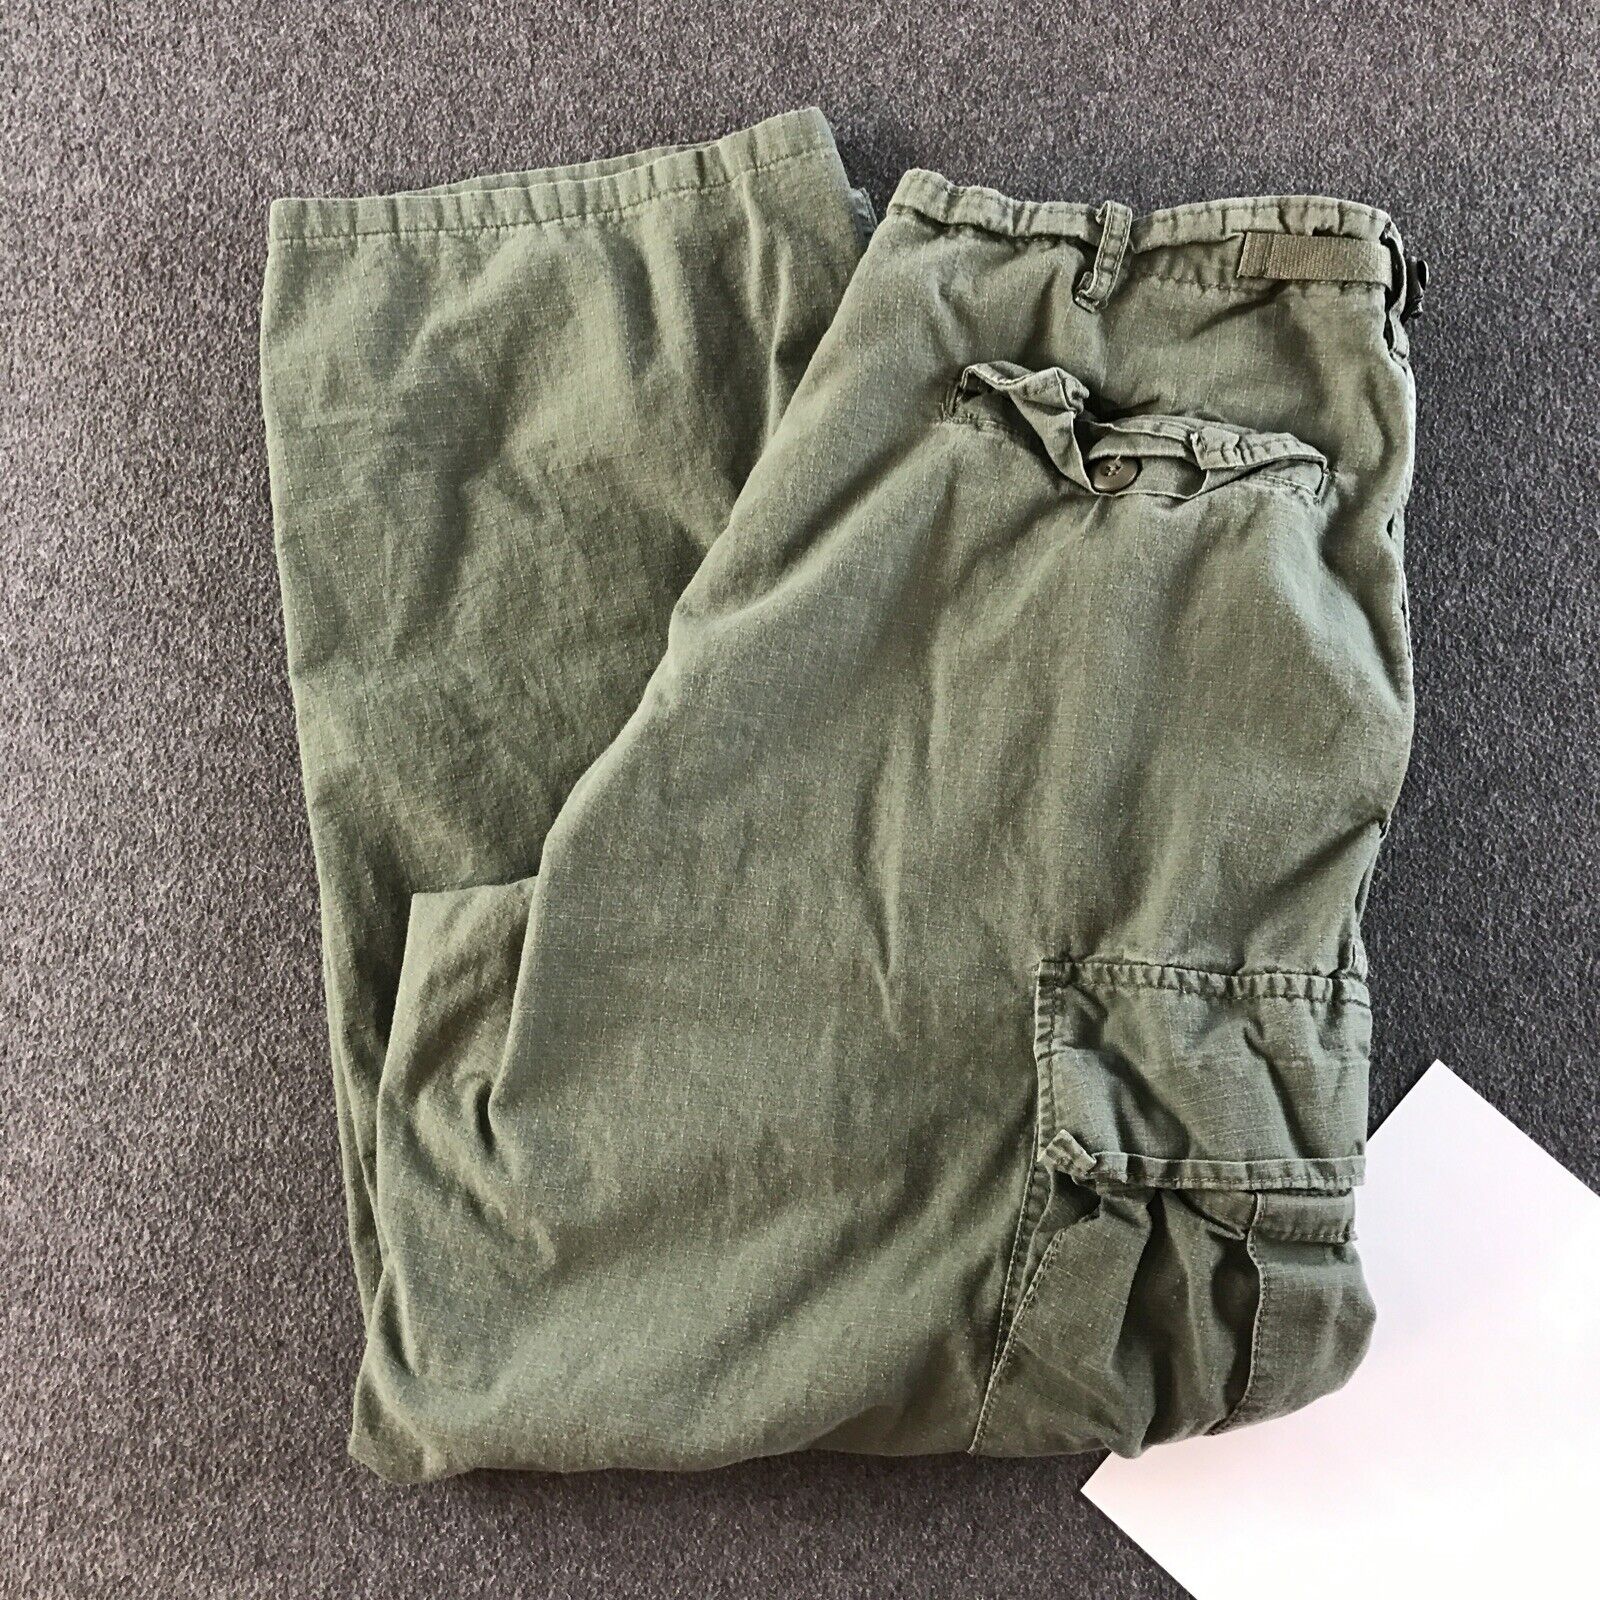 US Military Pants Mens Large Regular Rothco Trousers Cotton Ripstop Cargo #5122